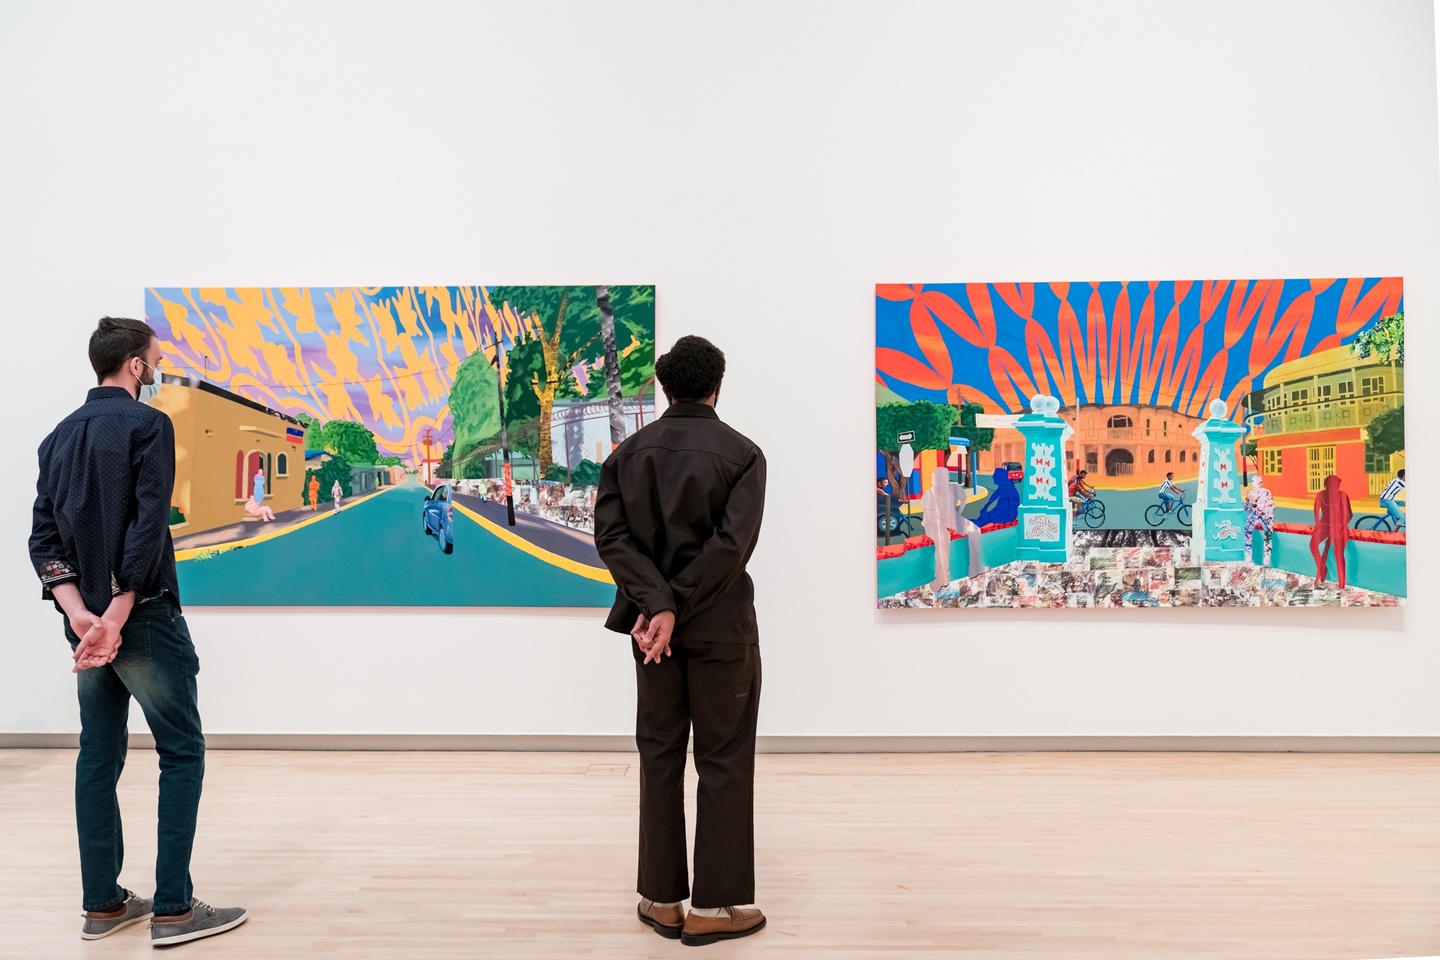 Two people looking at large colorful paintings